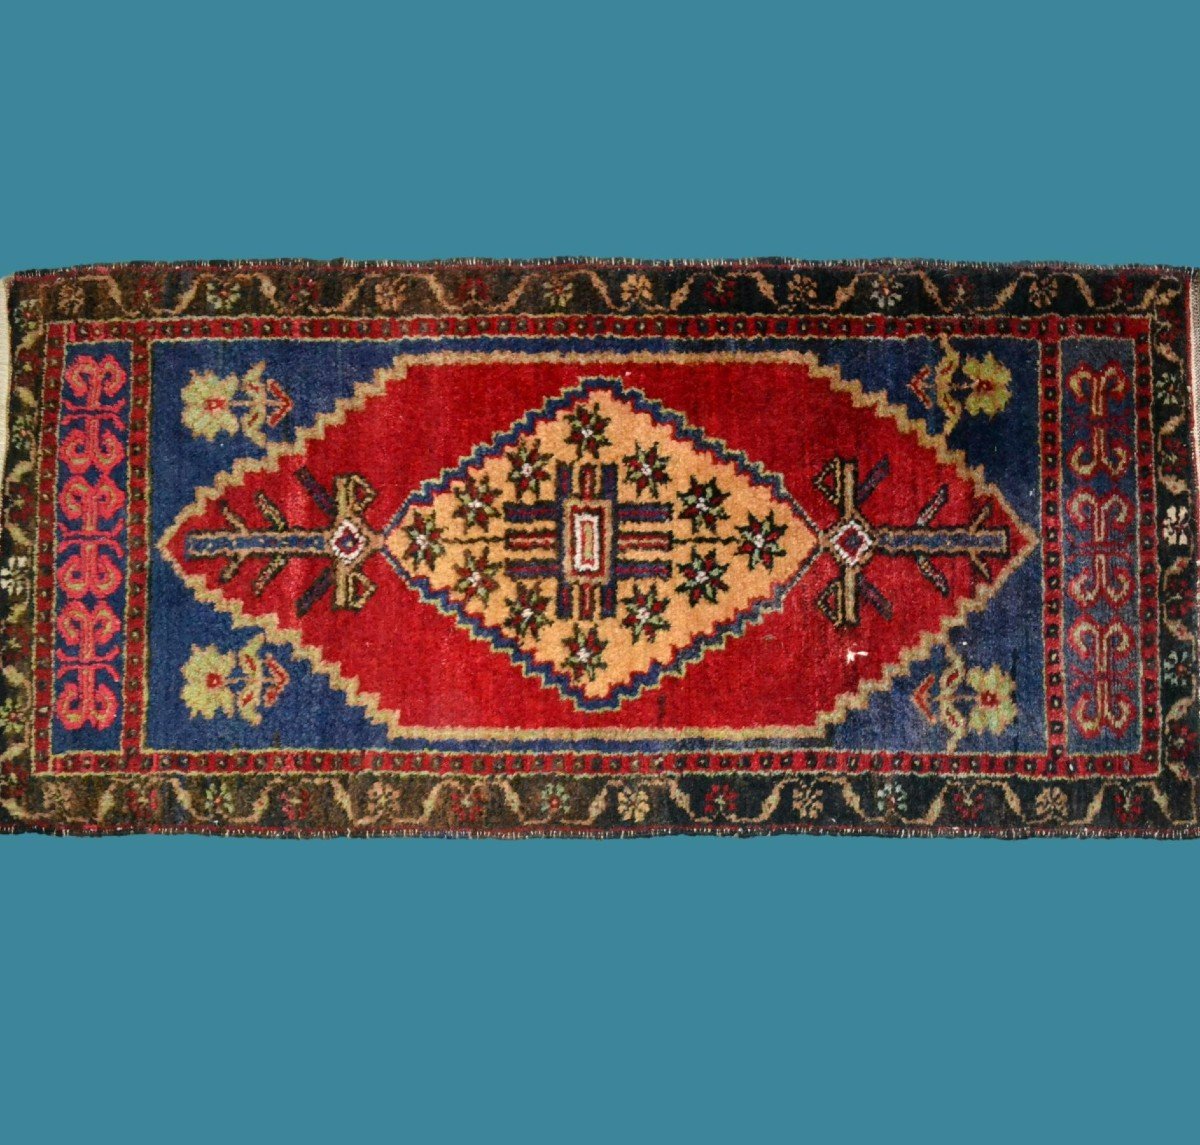 Yastik Around 1950, 51 Cm X 109 Cm, Hand-knotted Wool In Turkey, Welcome Mat, In Good Condition-photo-3